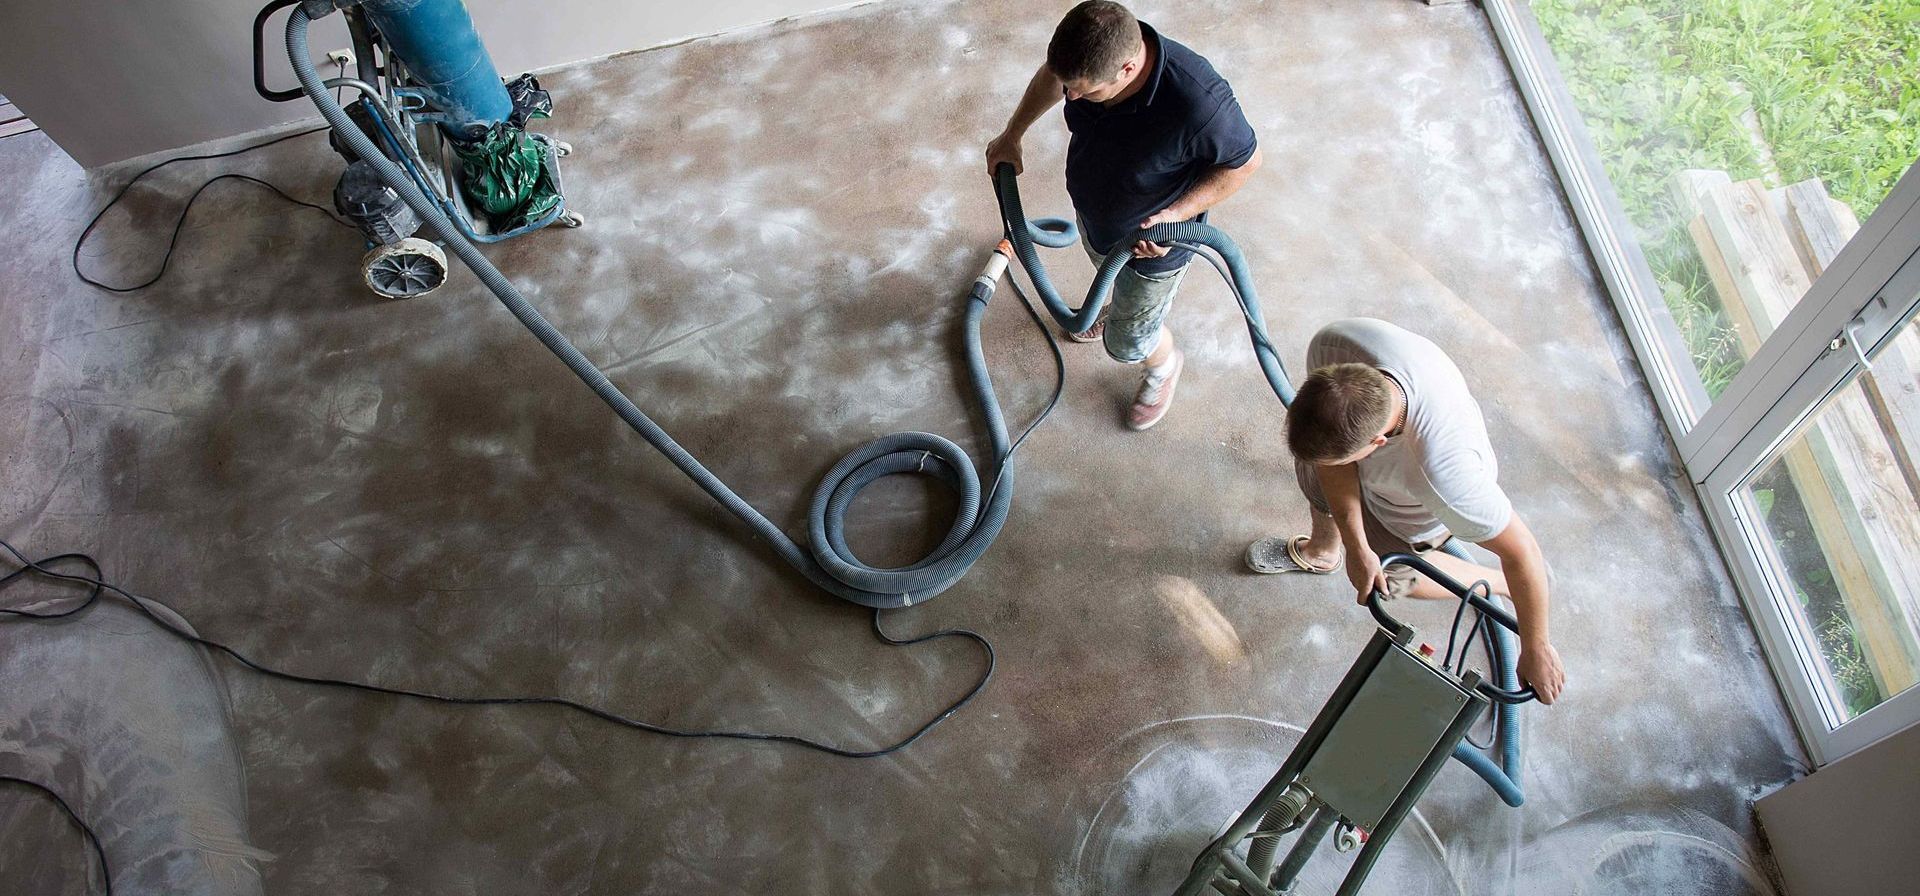 Workers Polishing Concrete Floor In House